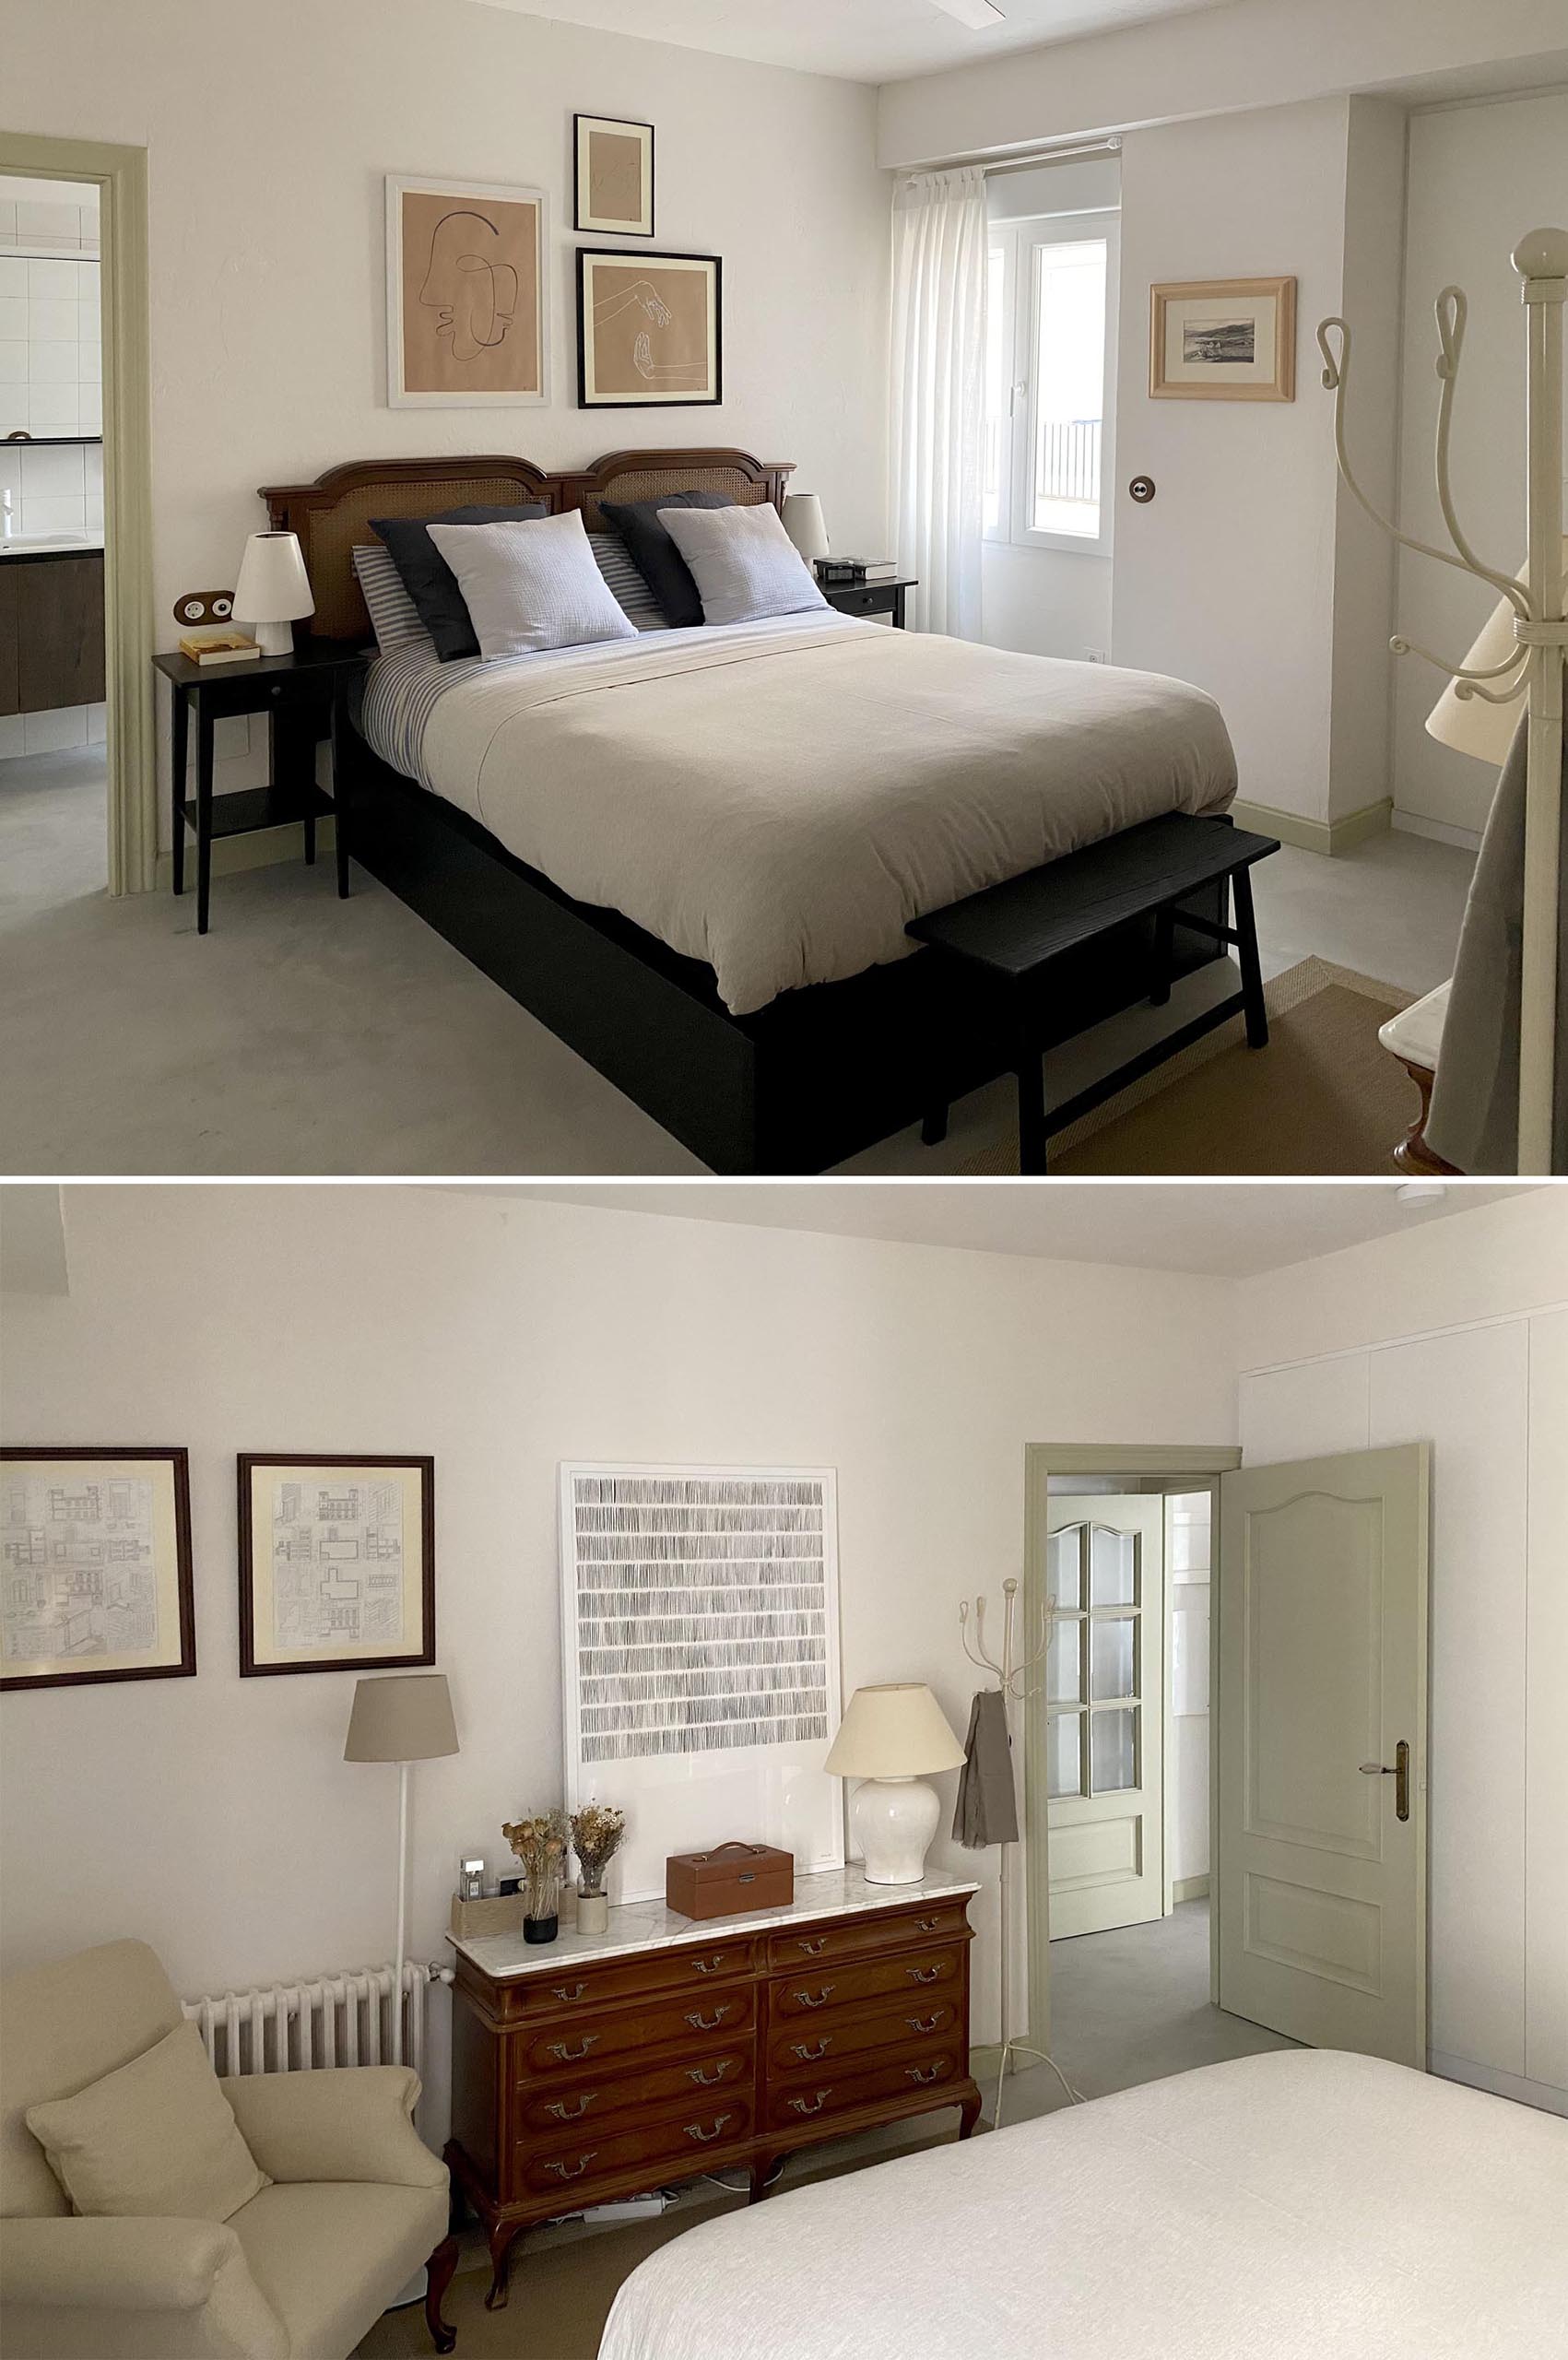 In the bedroom, a dark bed frame contrasts the white walls, but also ties in with the black picture frames, bench, and side tables.